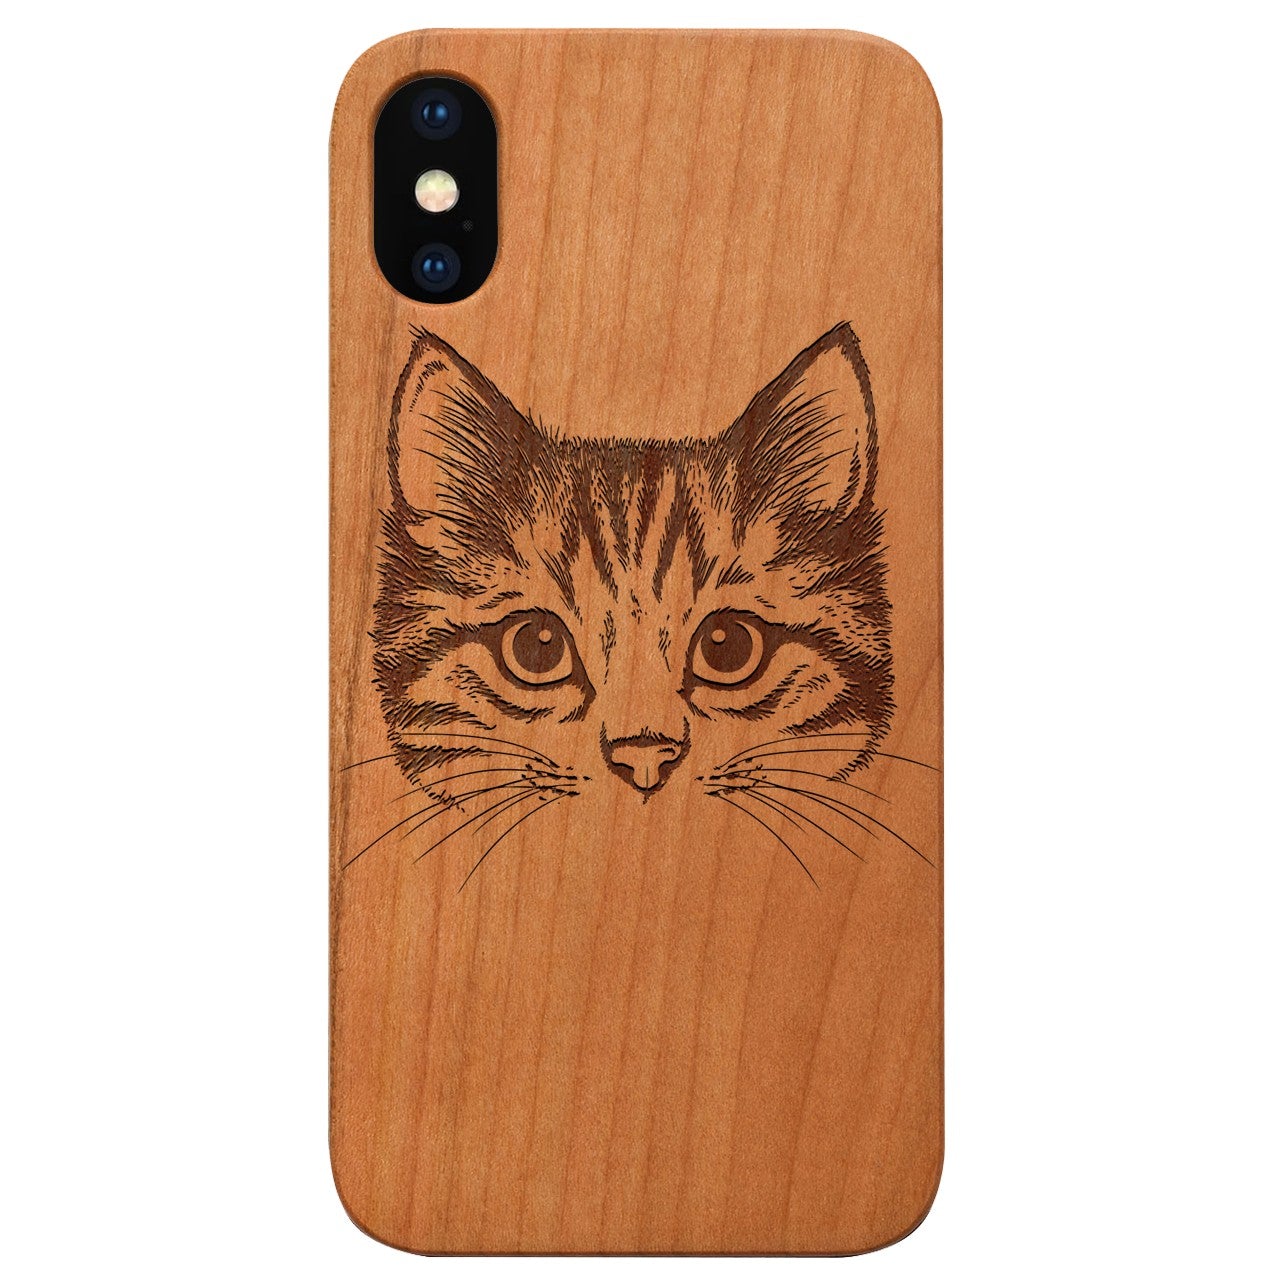  Cat Head - Engraved - Wooden Phone Case - IPhone 13 Models